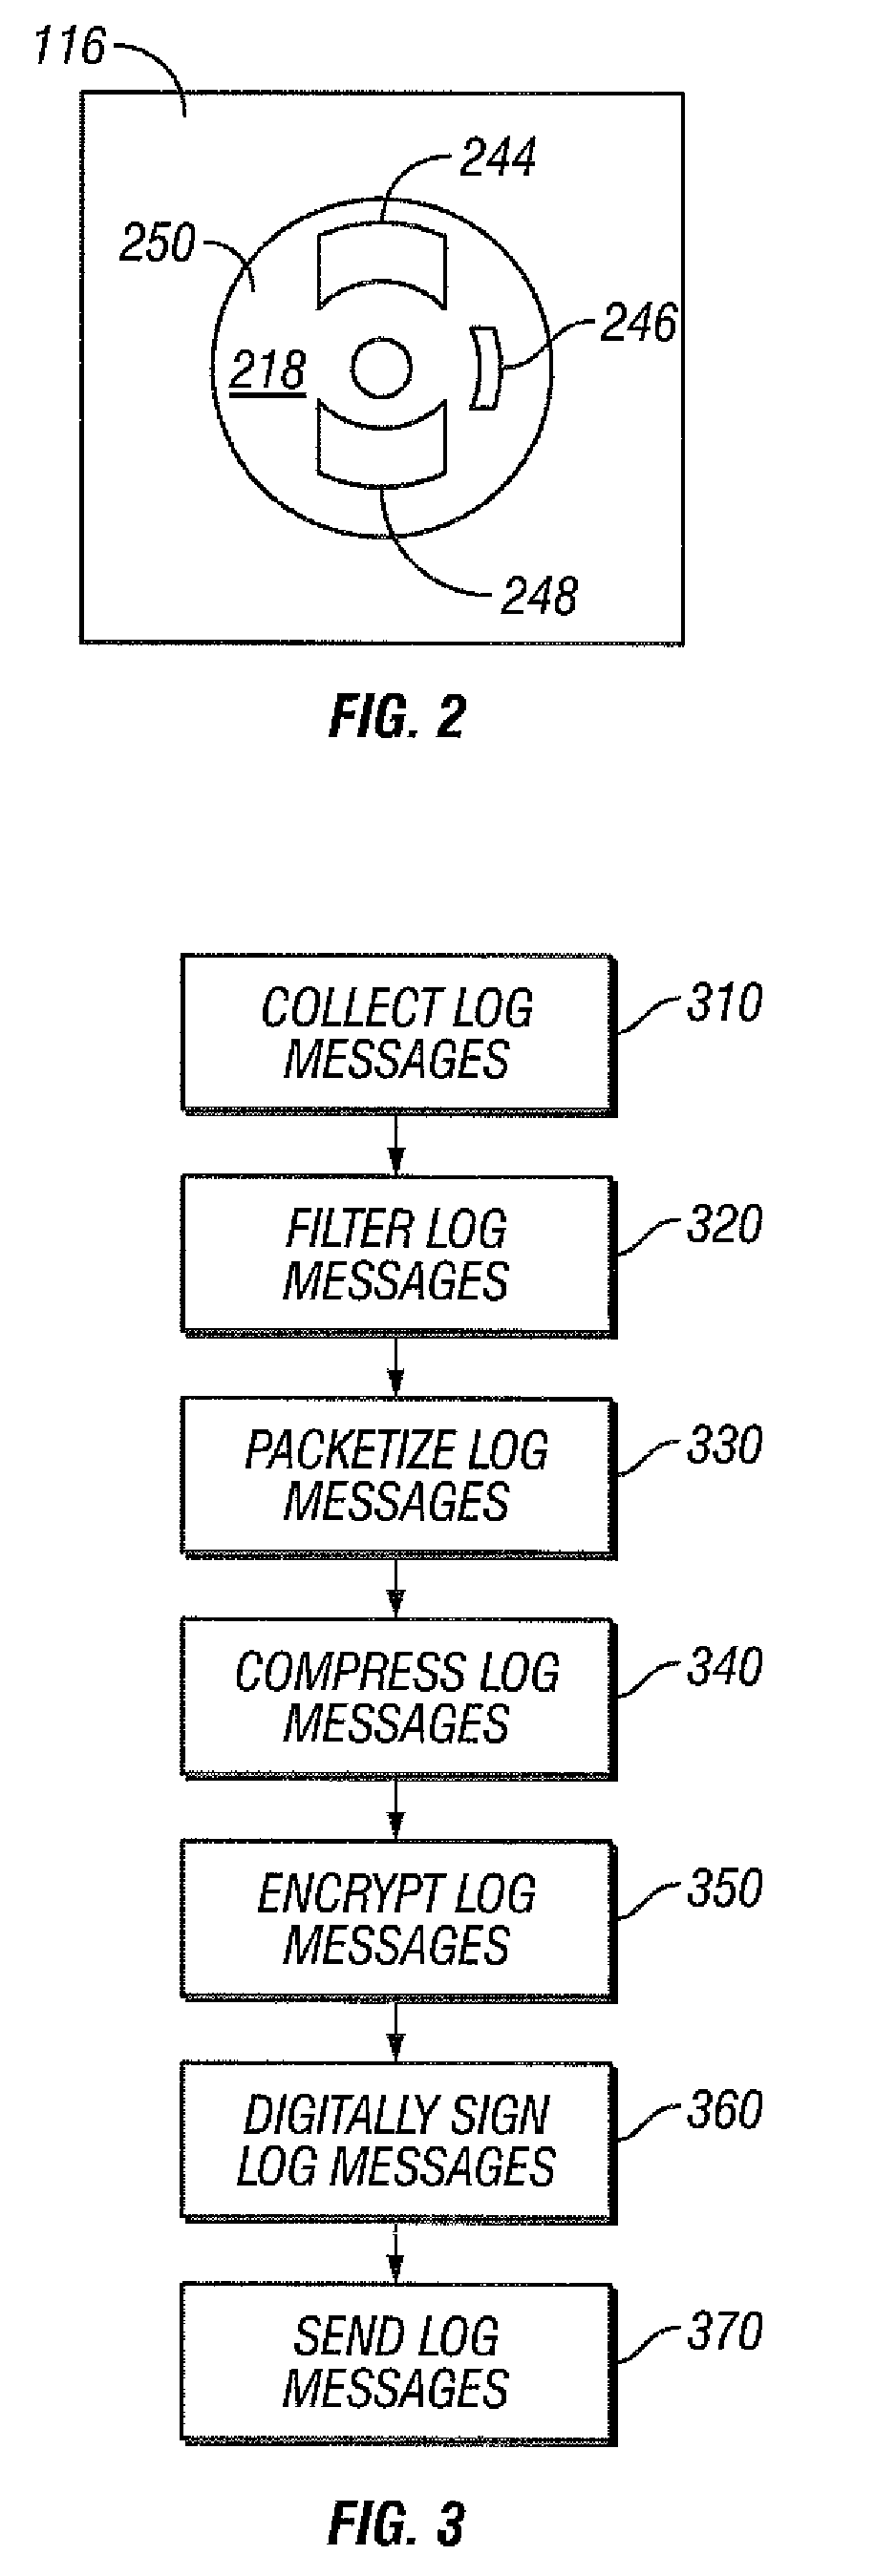 Systems and methods for automated log event normalization using three-staged regular expressions